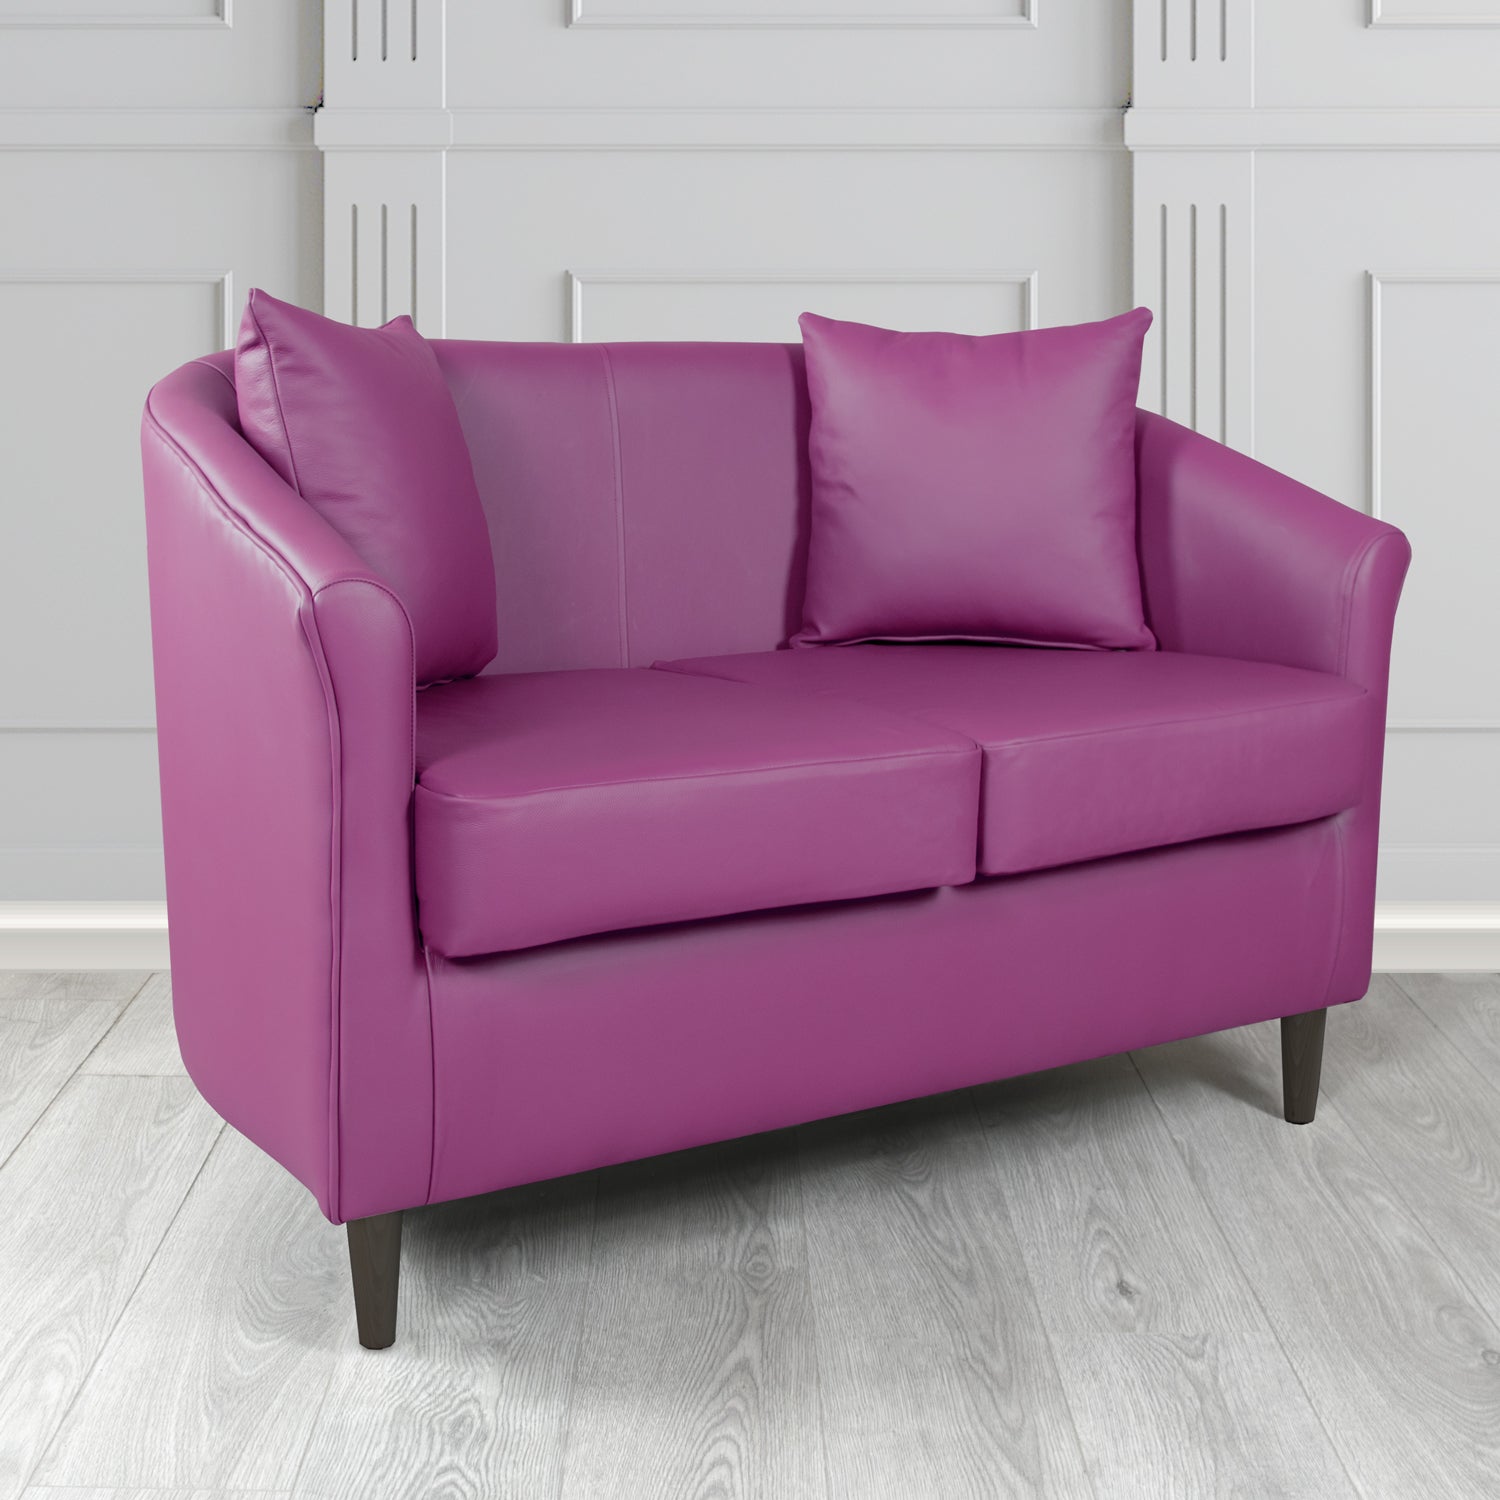 St Tropez Shelly Wineberry Crib 5 Genuine Leather 2 Seater Tub Sofa with Scatter Cushions - The Tub Chair Shop